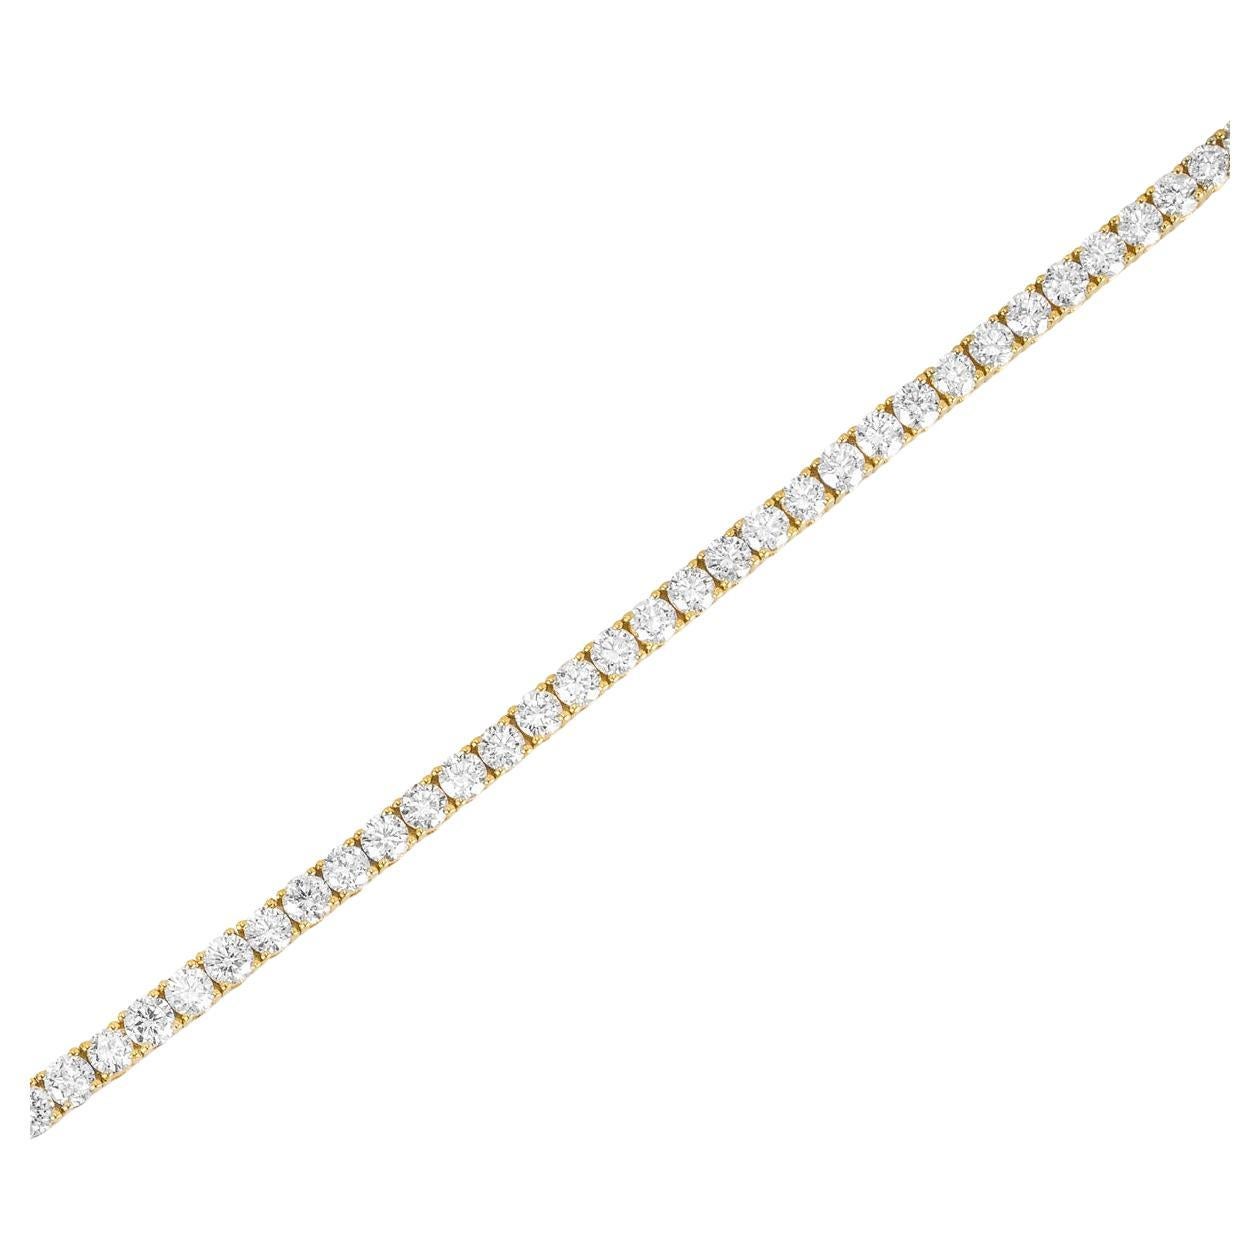 A sparkly 18k yellow gold diamond line bracelet. The tennis bracelet features 67 round brilliant cut diamonds set in a four prong mount with a total weight of 4.27ct, F-G colour and SI clarity. The 7-inch long bracelet measures 3mm in width,